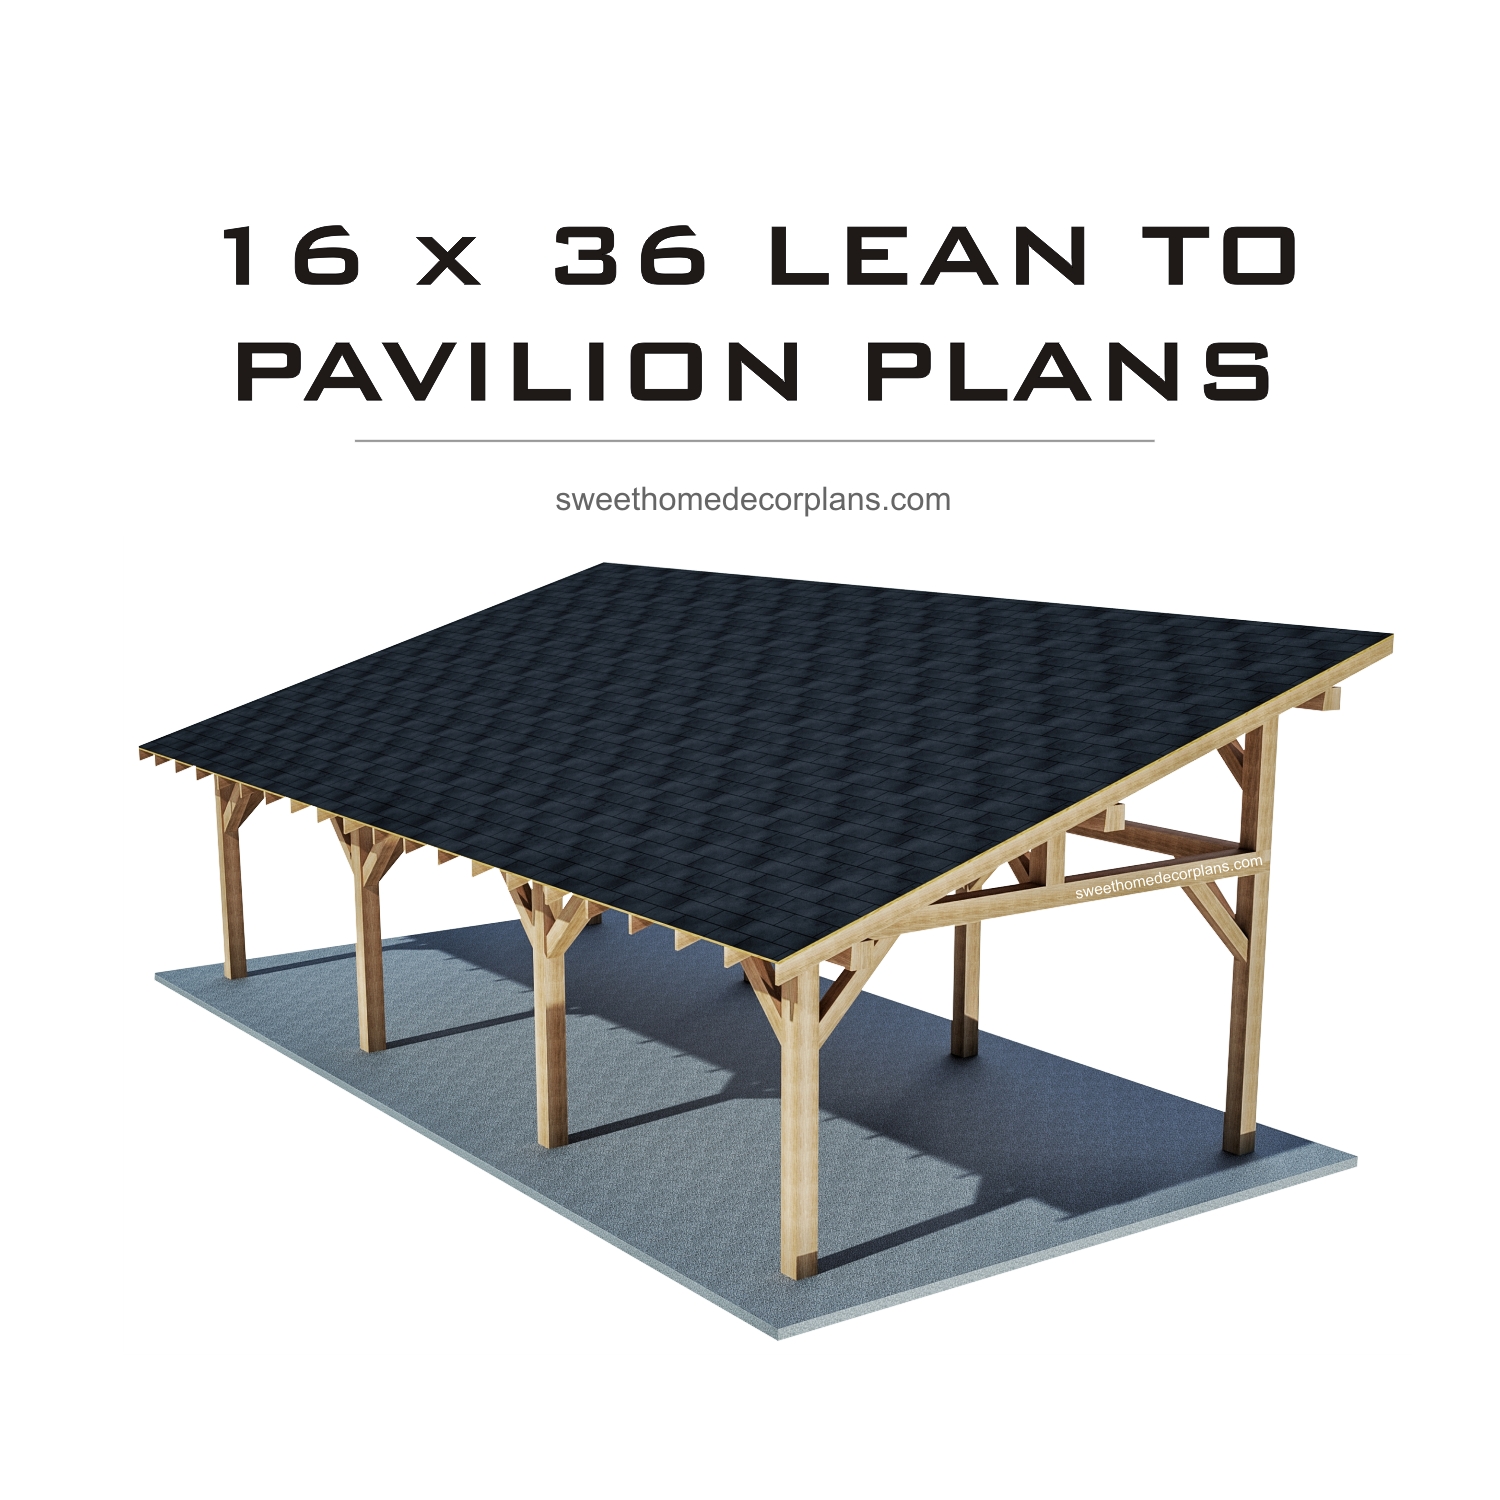 Diy-wooden-16-x-36-lean-to-pavilion-plans-in-pdf-for-outdoor